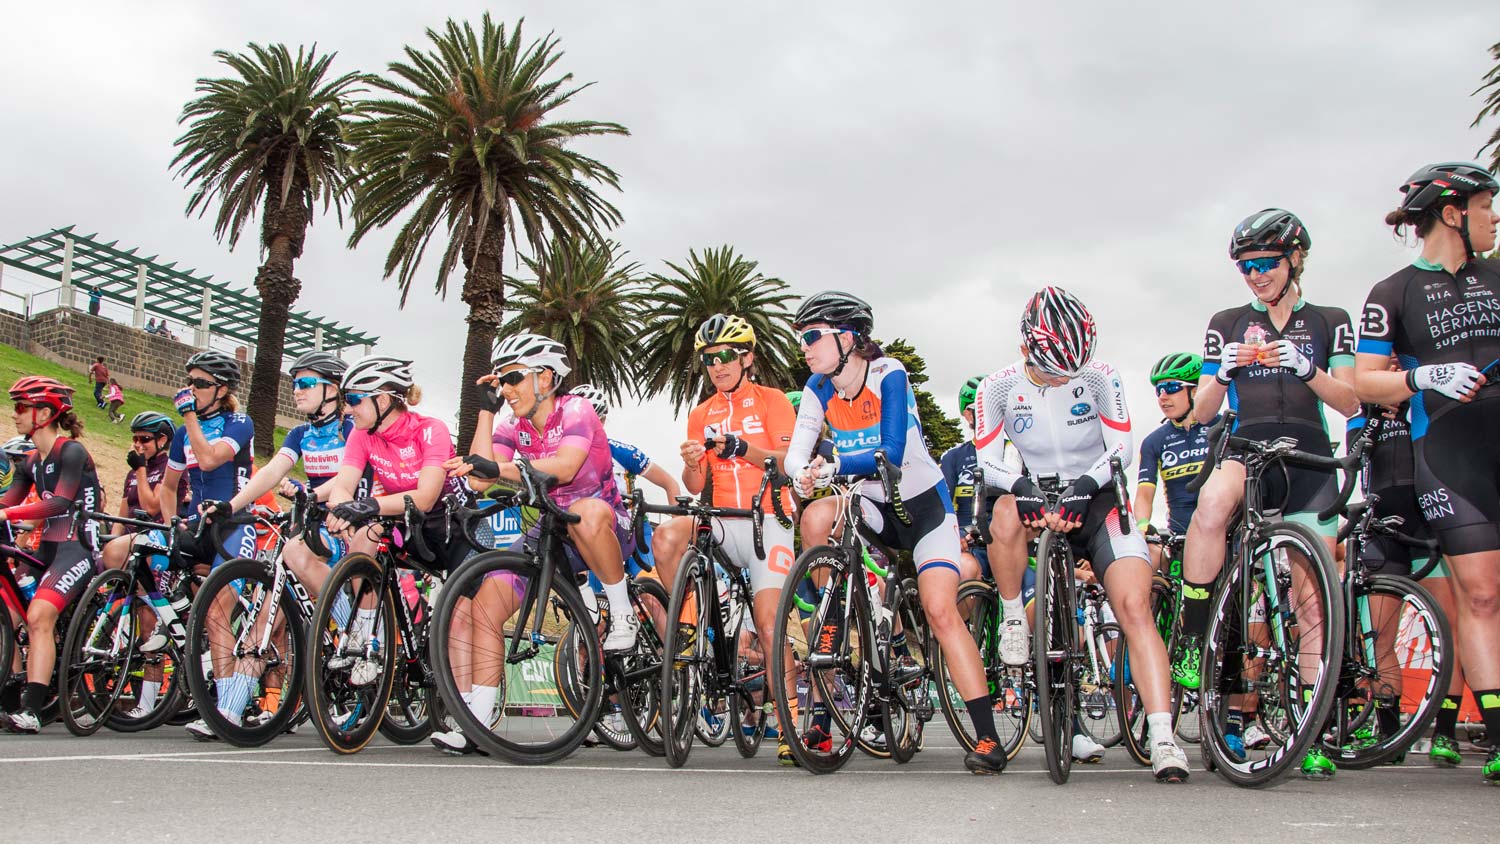 Racing is about to commence... round one of the Mitchelton Bay Cycling Classic in Geelong is about to get underway. Photo: Jean-Pierre Ronco